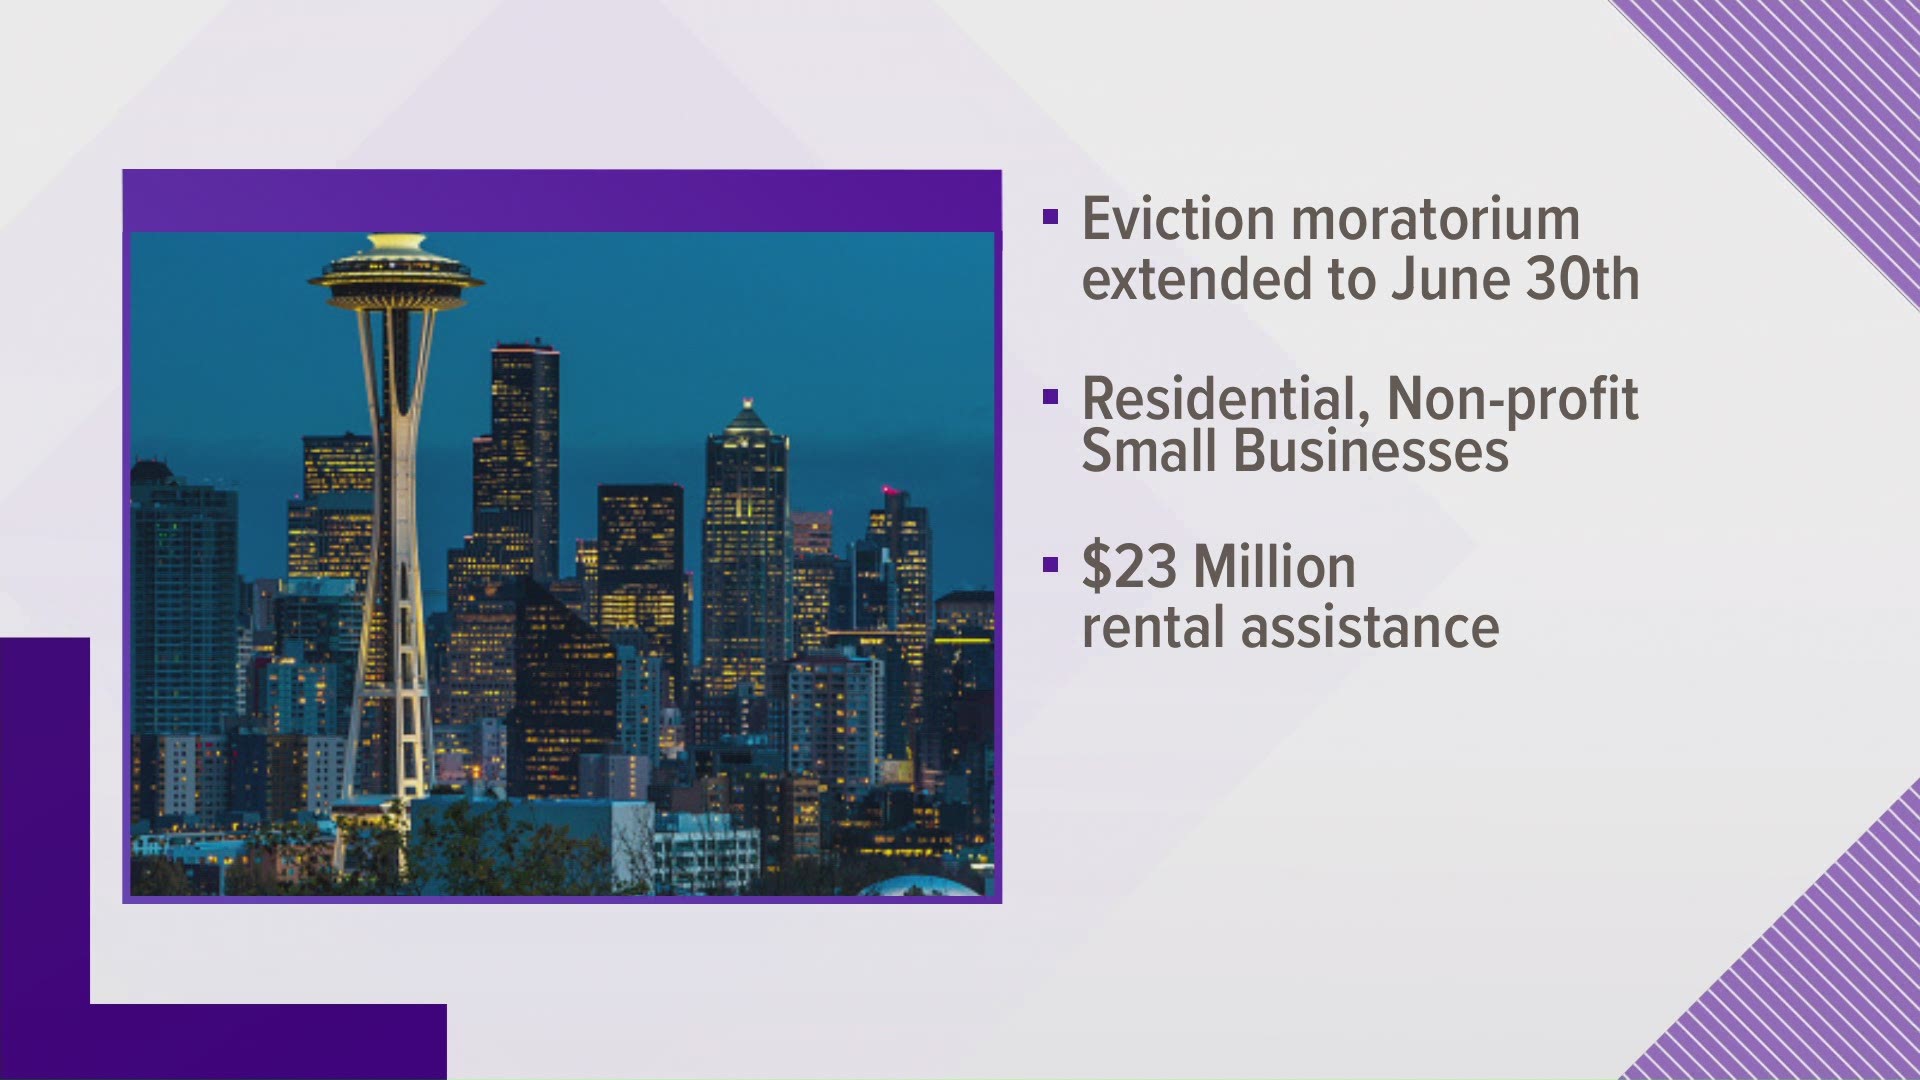 While the eviction moratorium is in place, property owners in Seattle may not issue notices of termination.